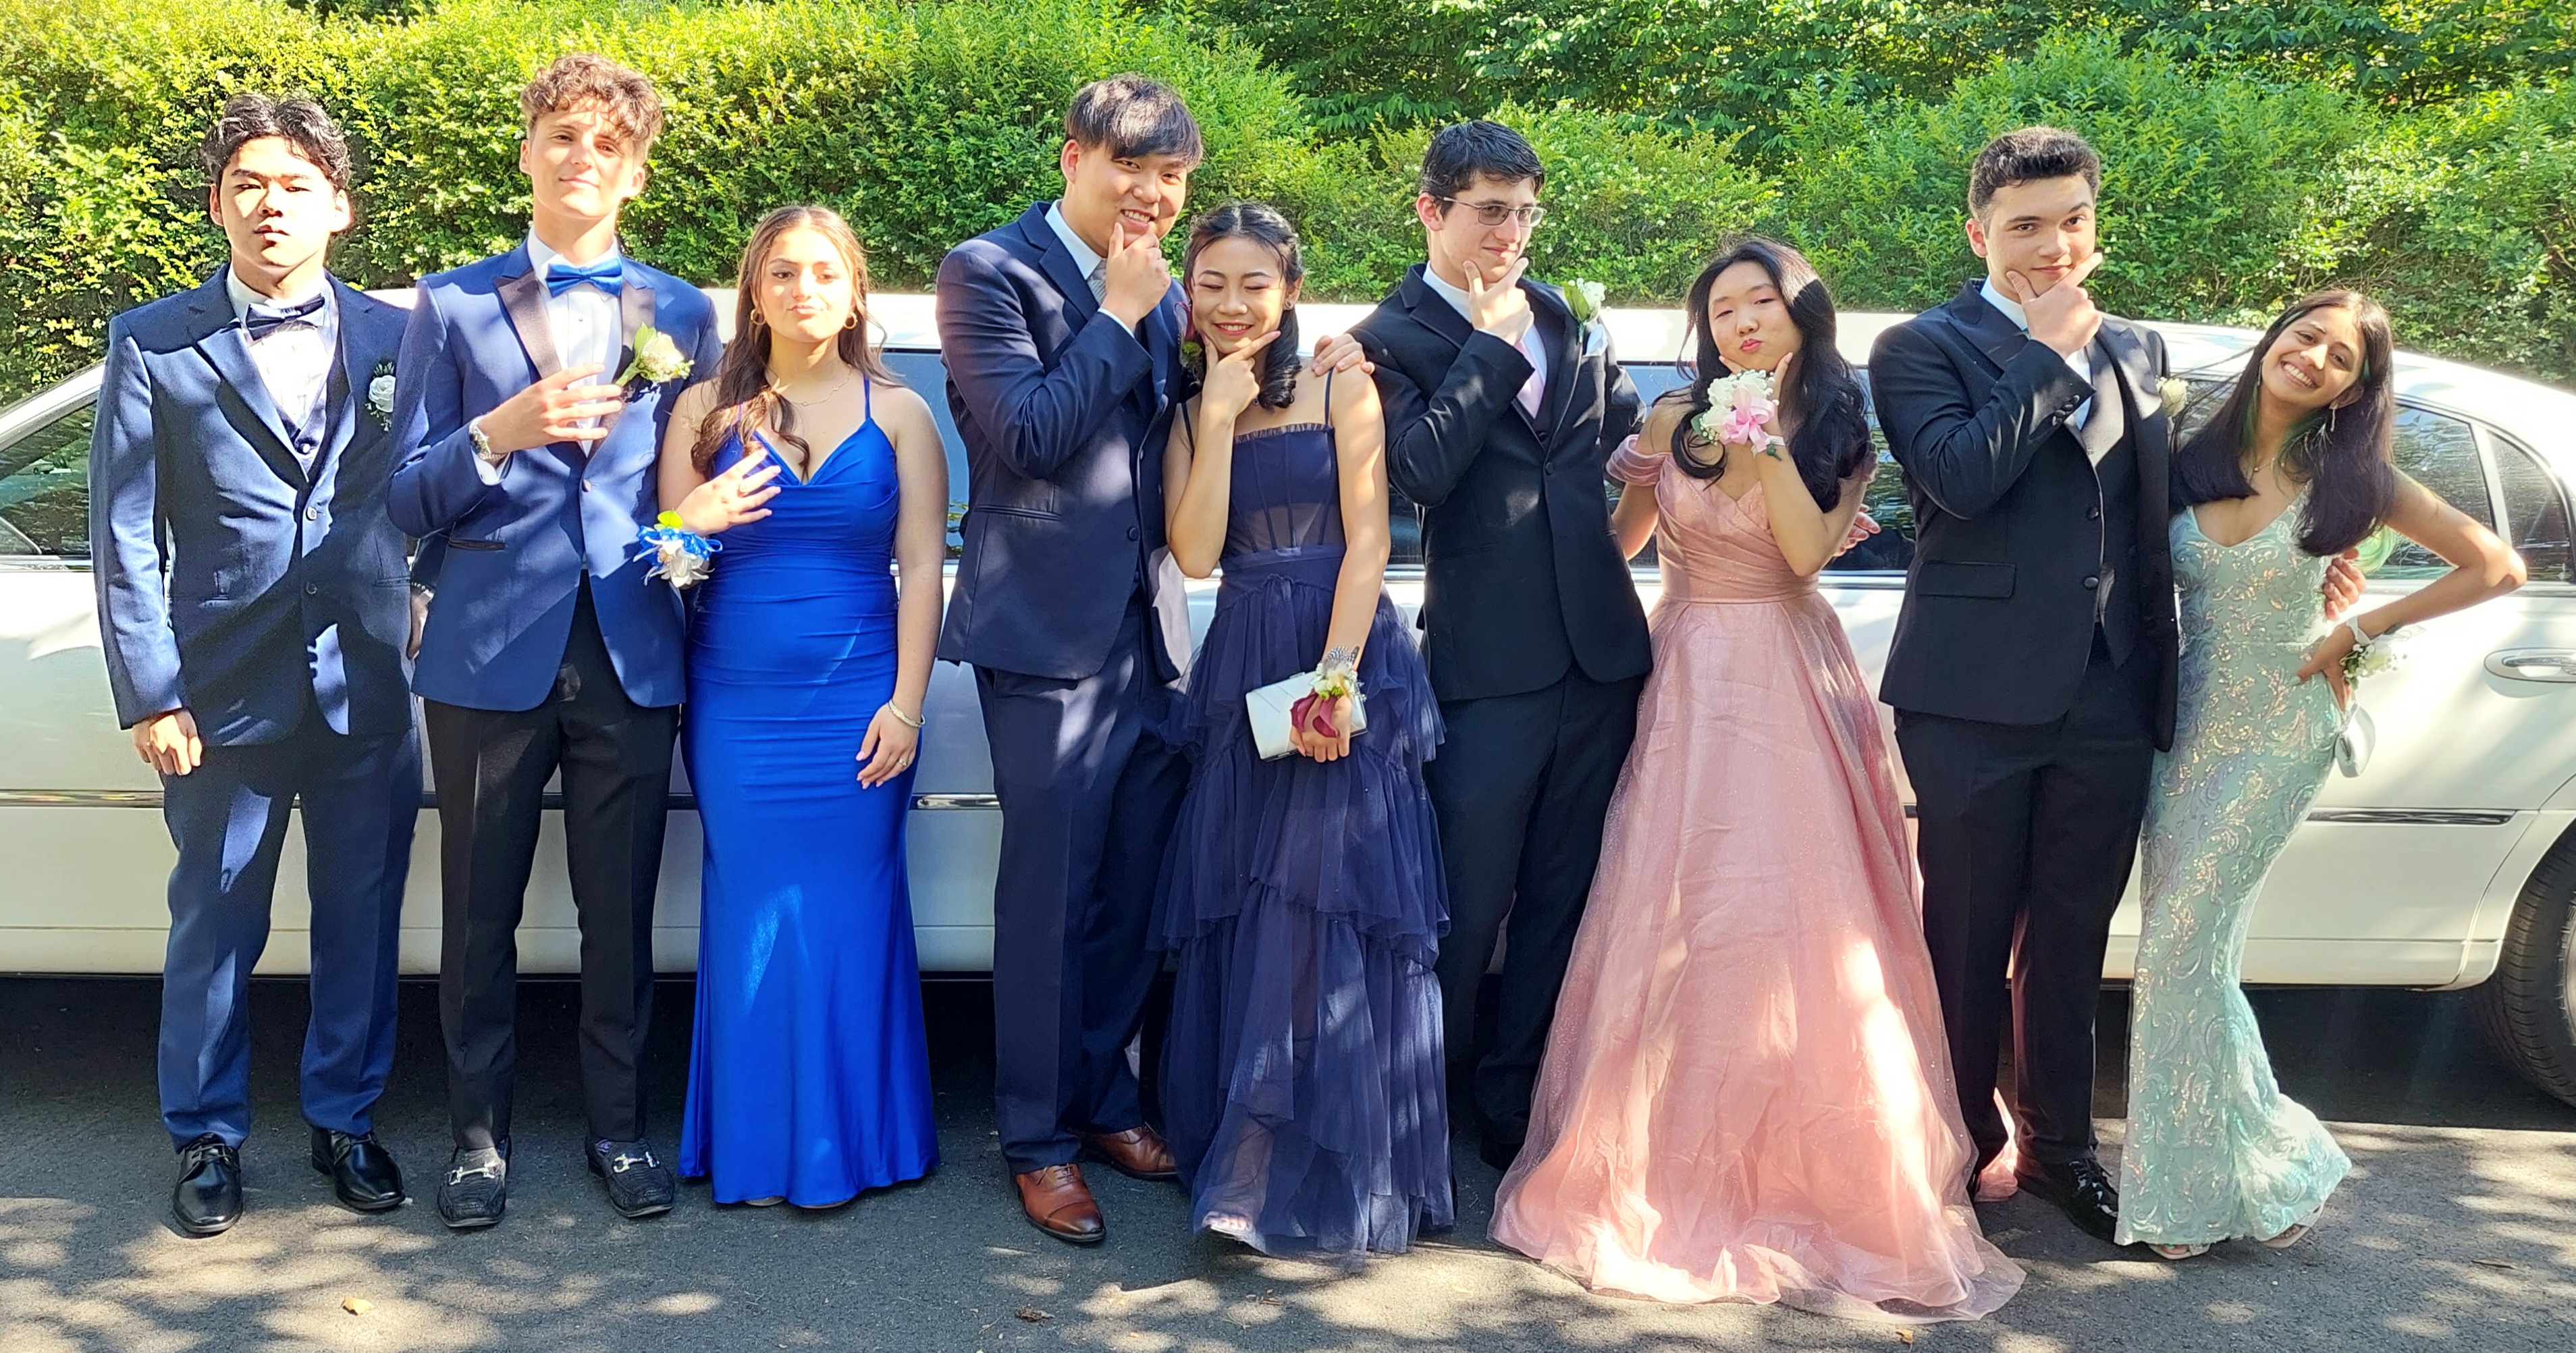 The Most Affordable And Trusted Prom Limo Service in Long Island 